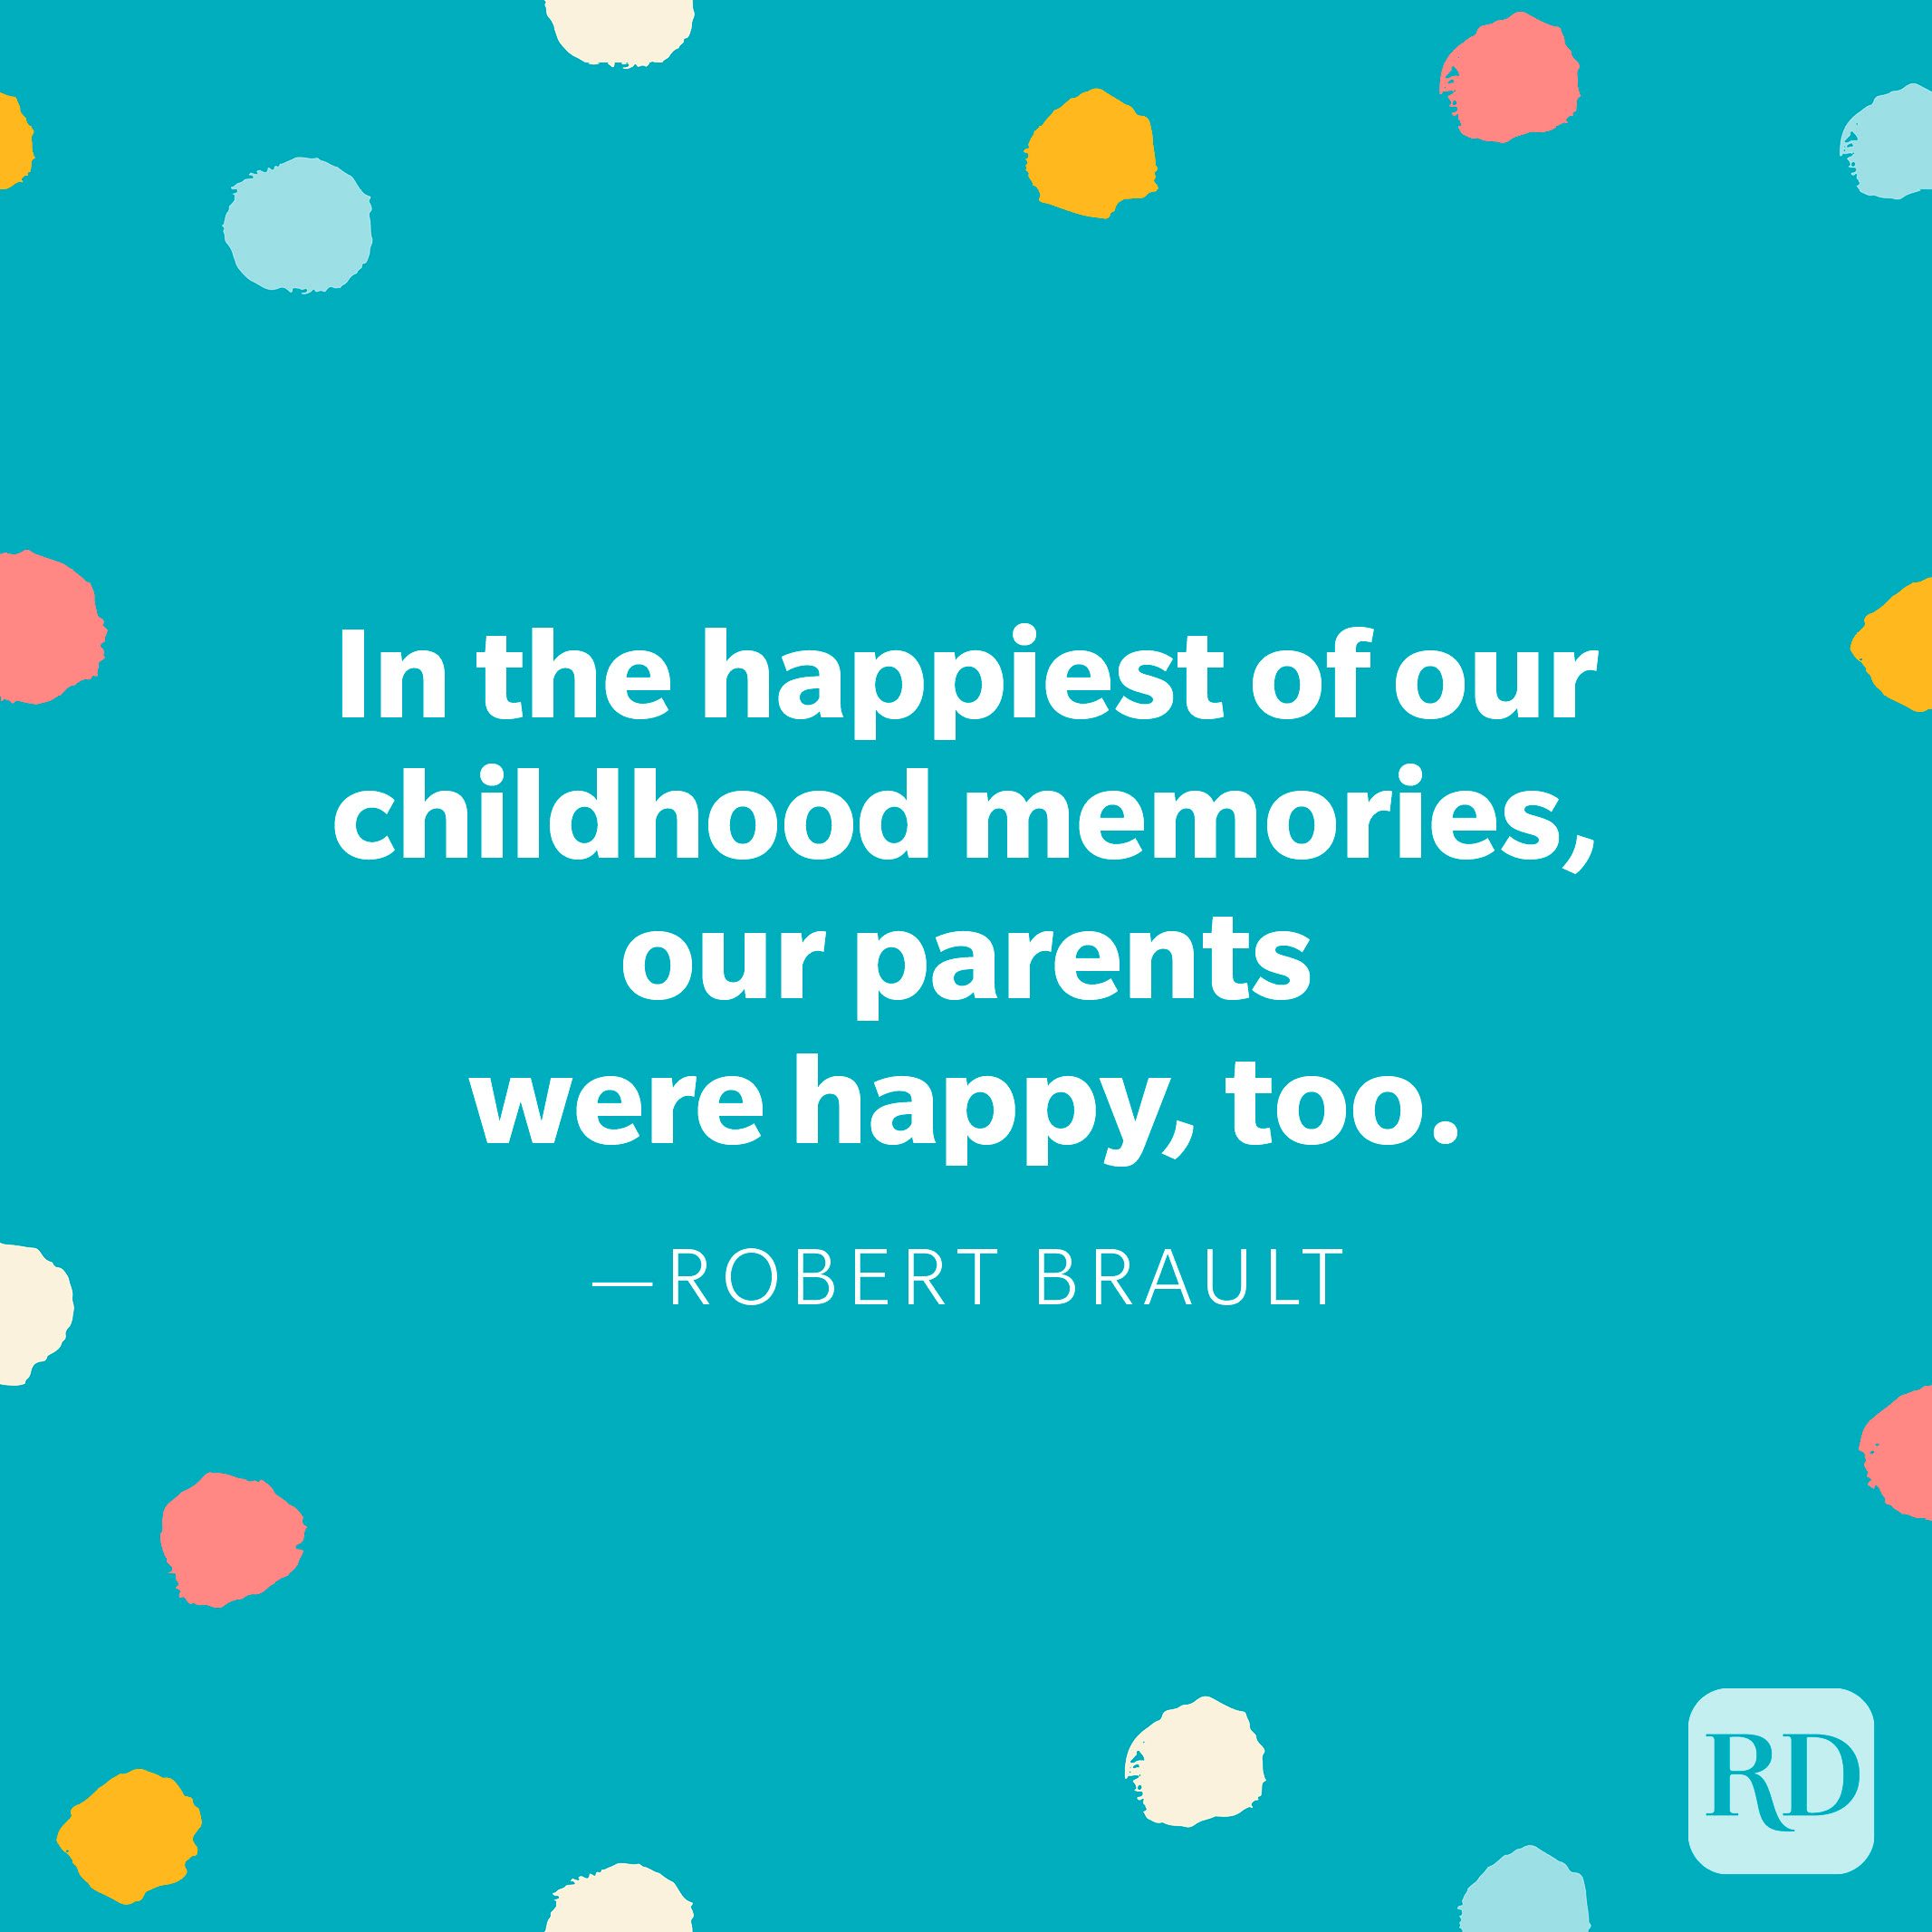 "In the happiest of our childhood memories, our parents were happy, too." – Robert Brault